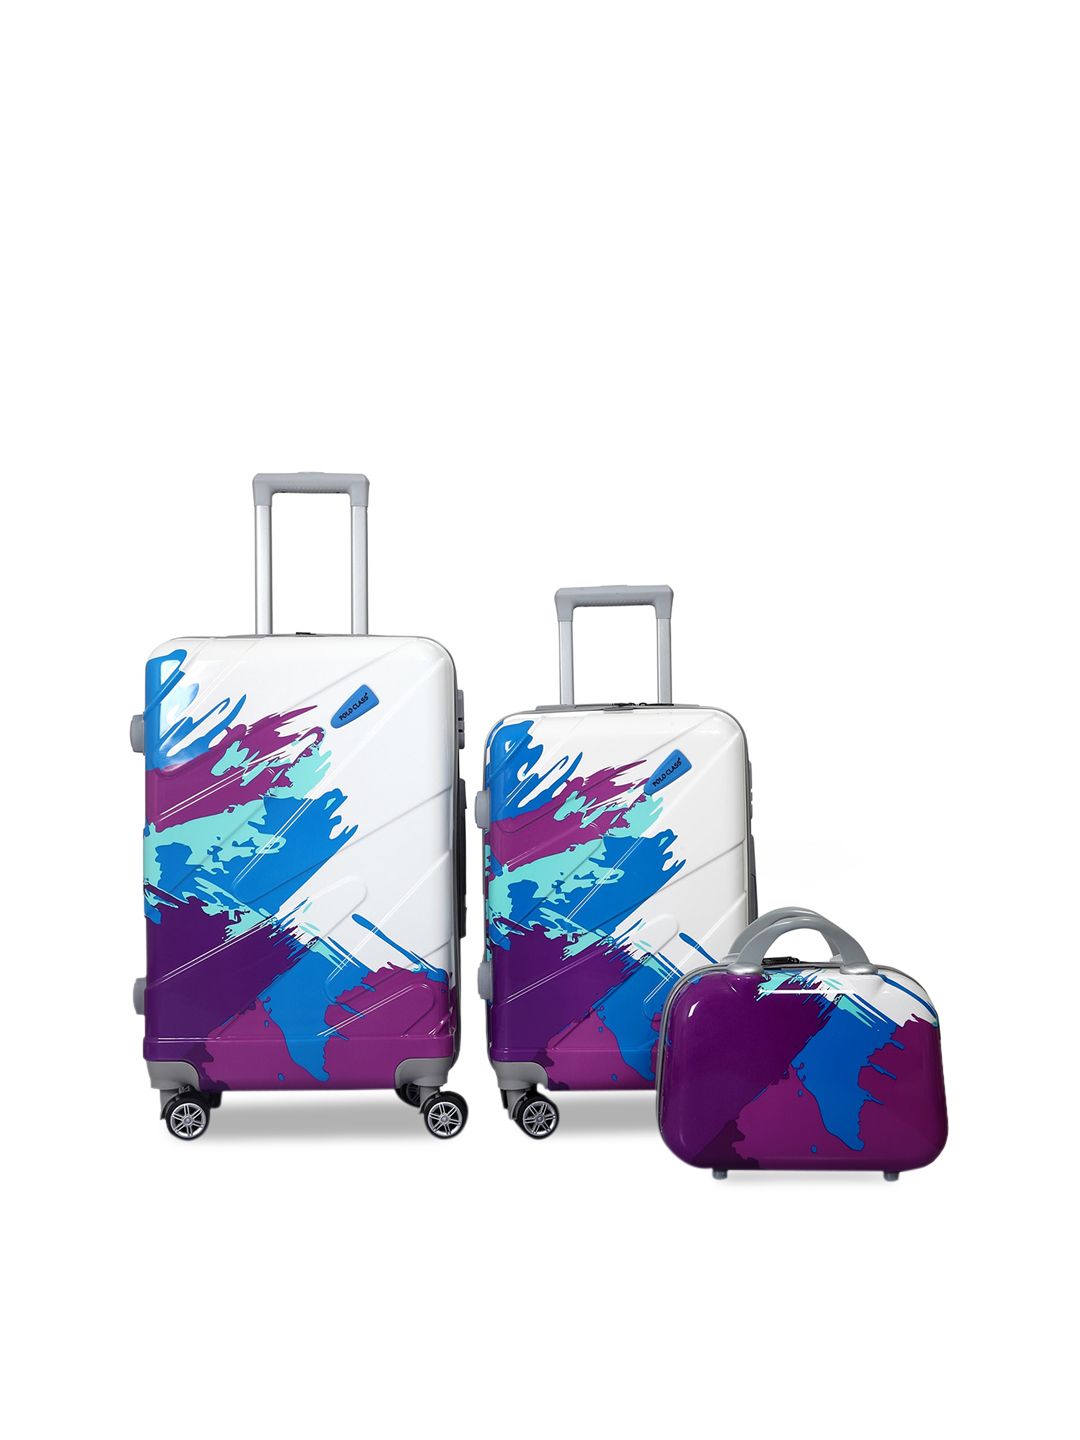 Polo Class Set Of 3 Printed Hard Case Luggage Trolley & Vanity Bag Price in India